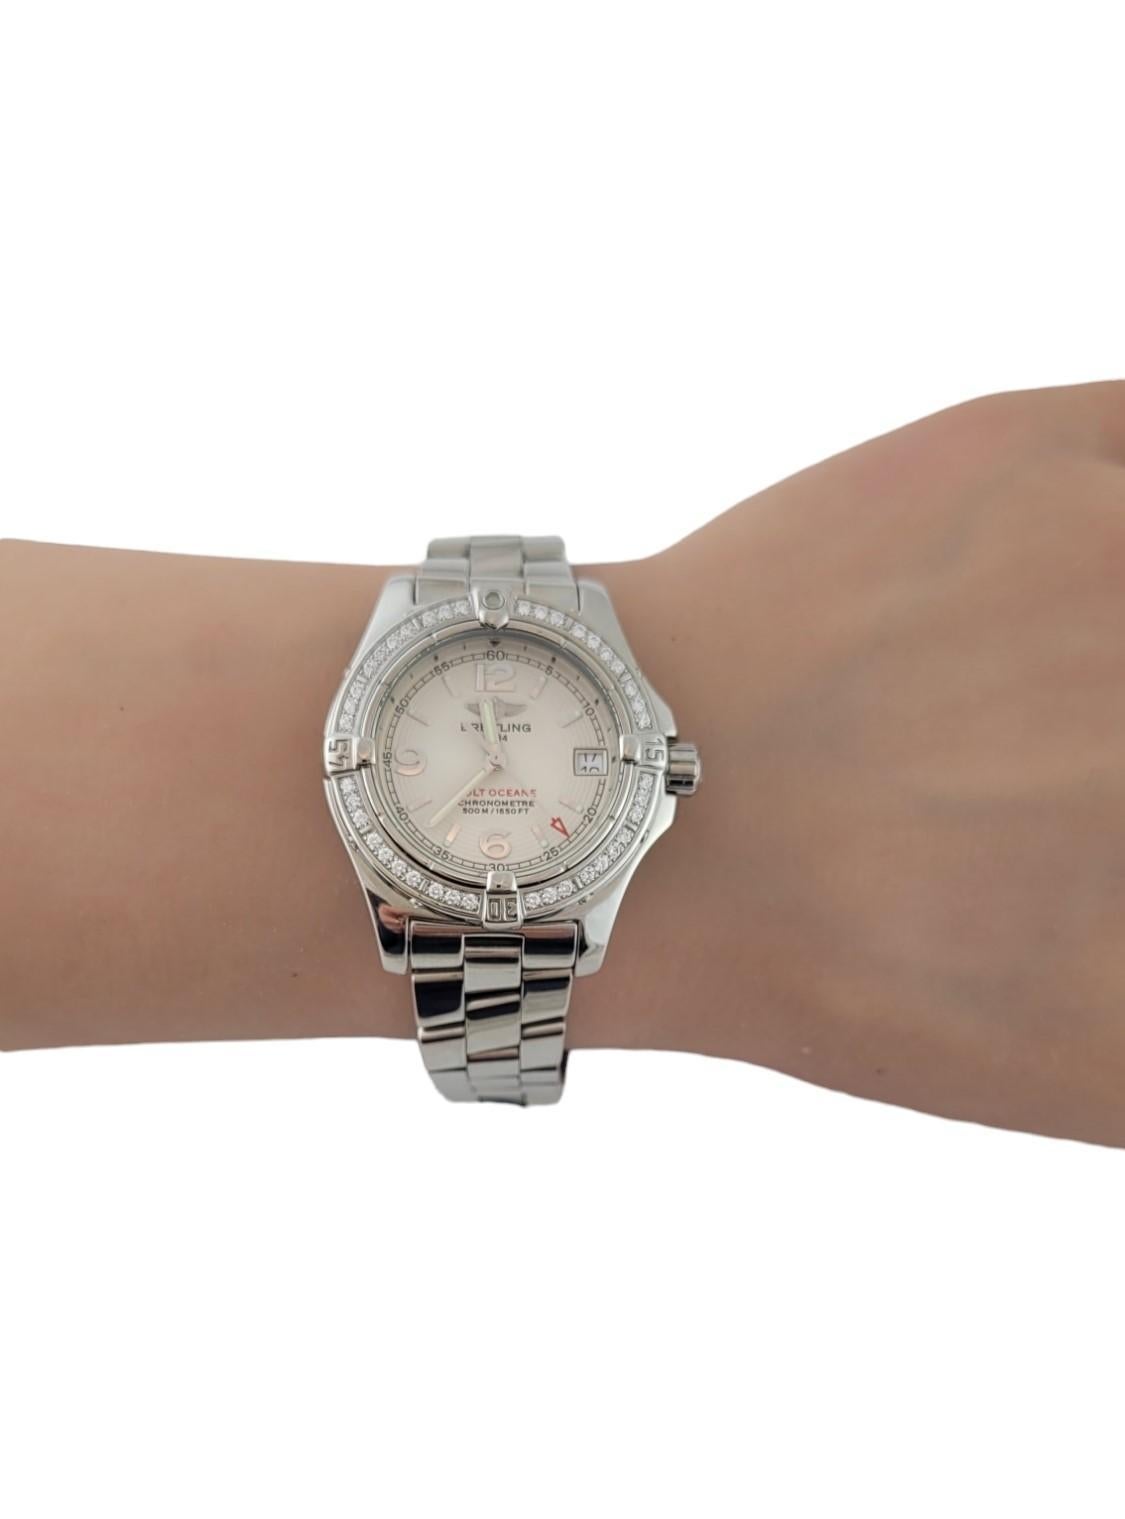 2007 Breitling Ladies Colt Oceane Diamond Watch A77380 Box/Papers # 17227 For Sale 4